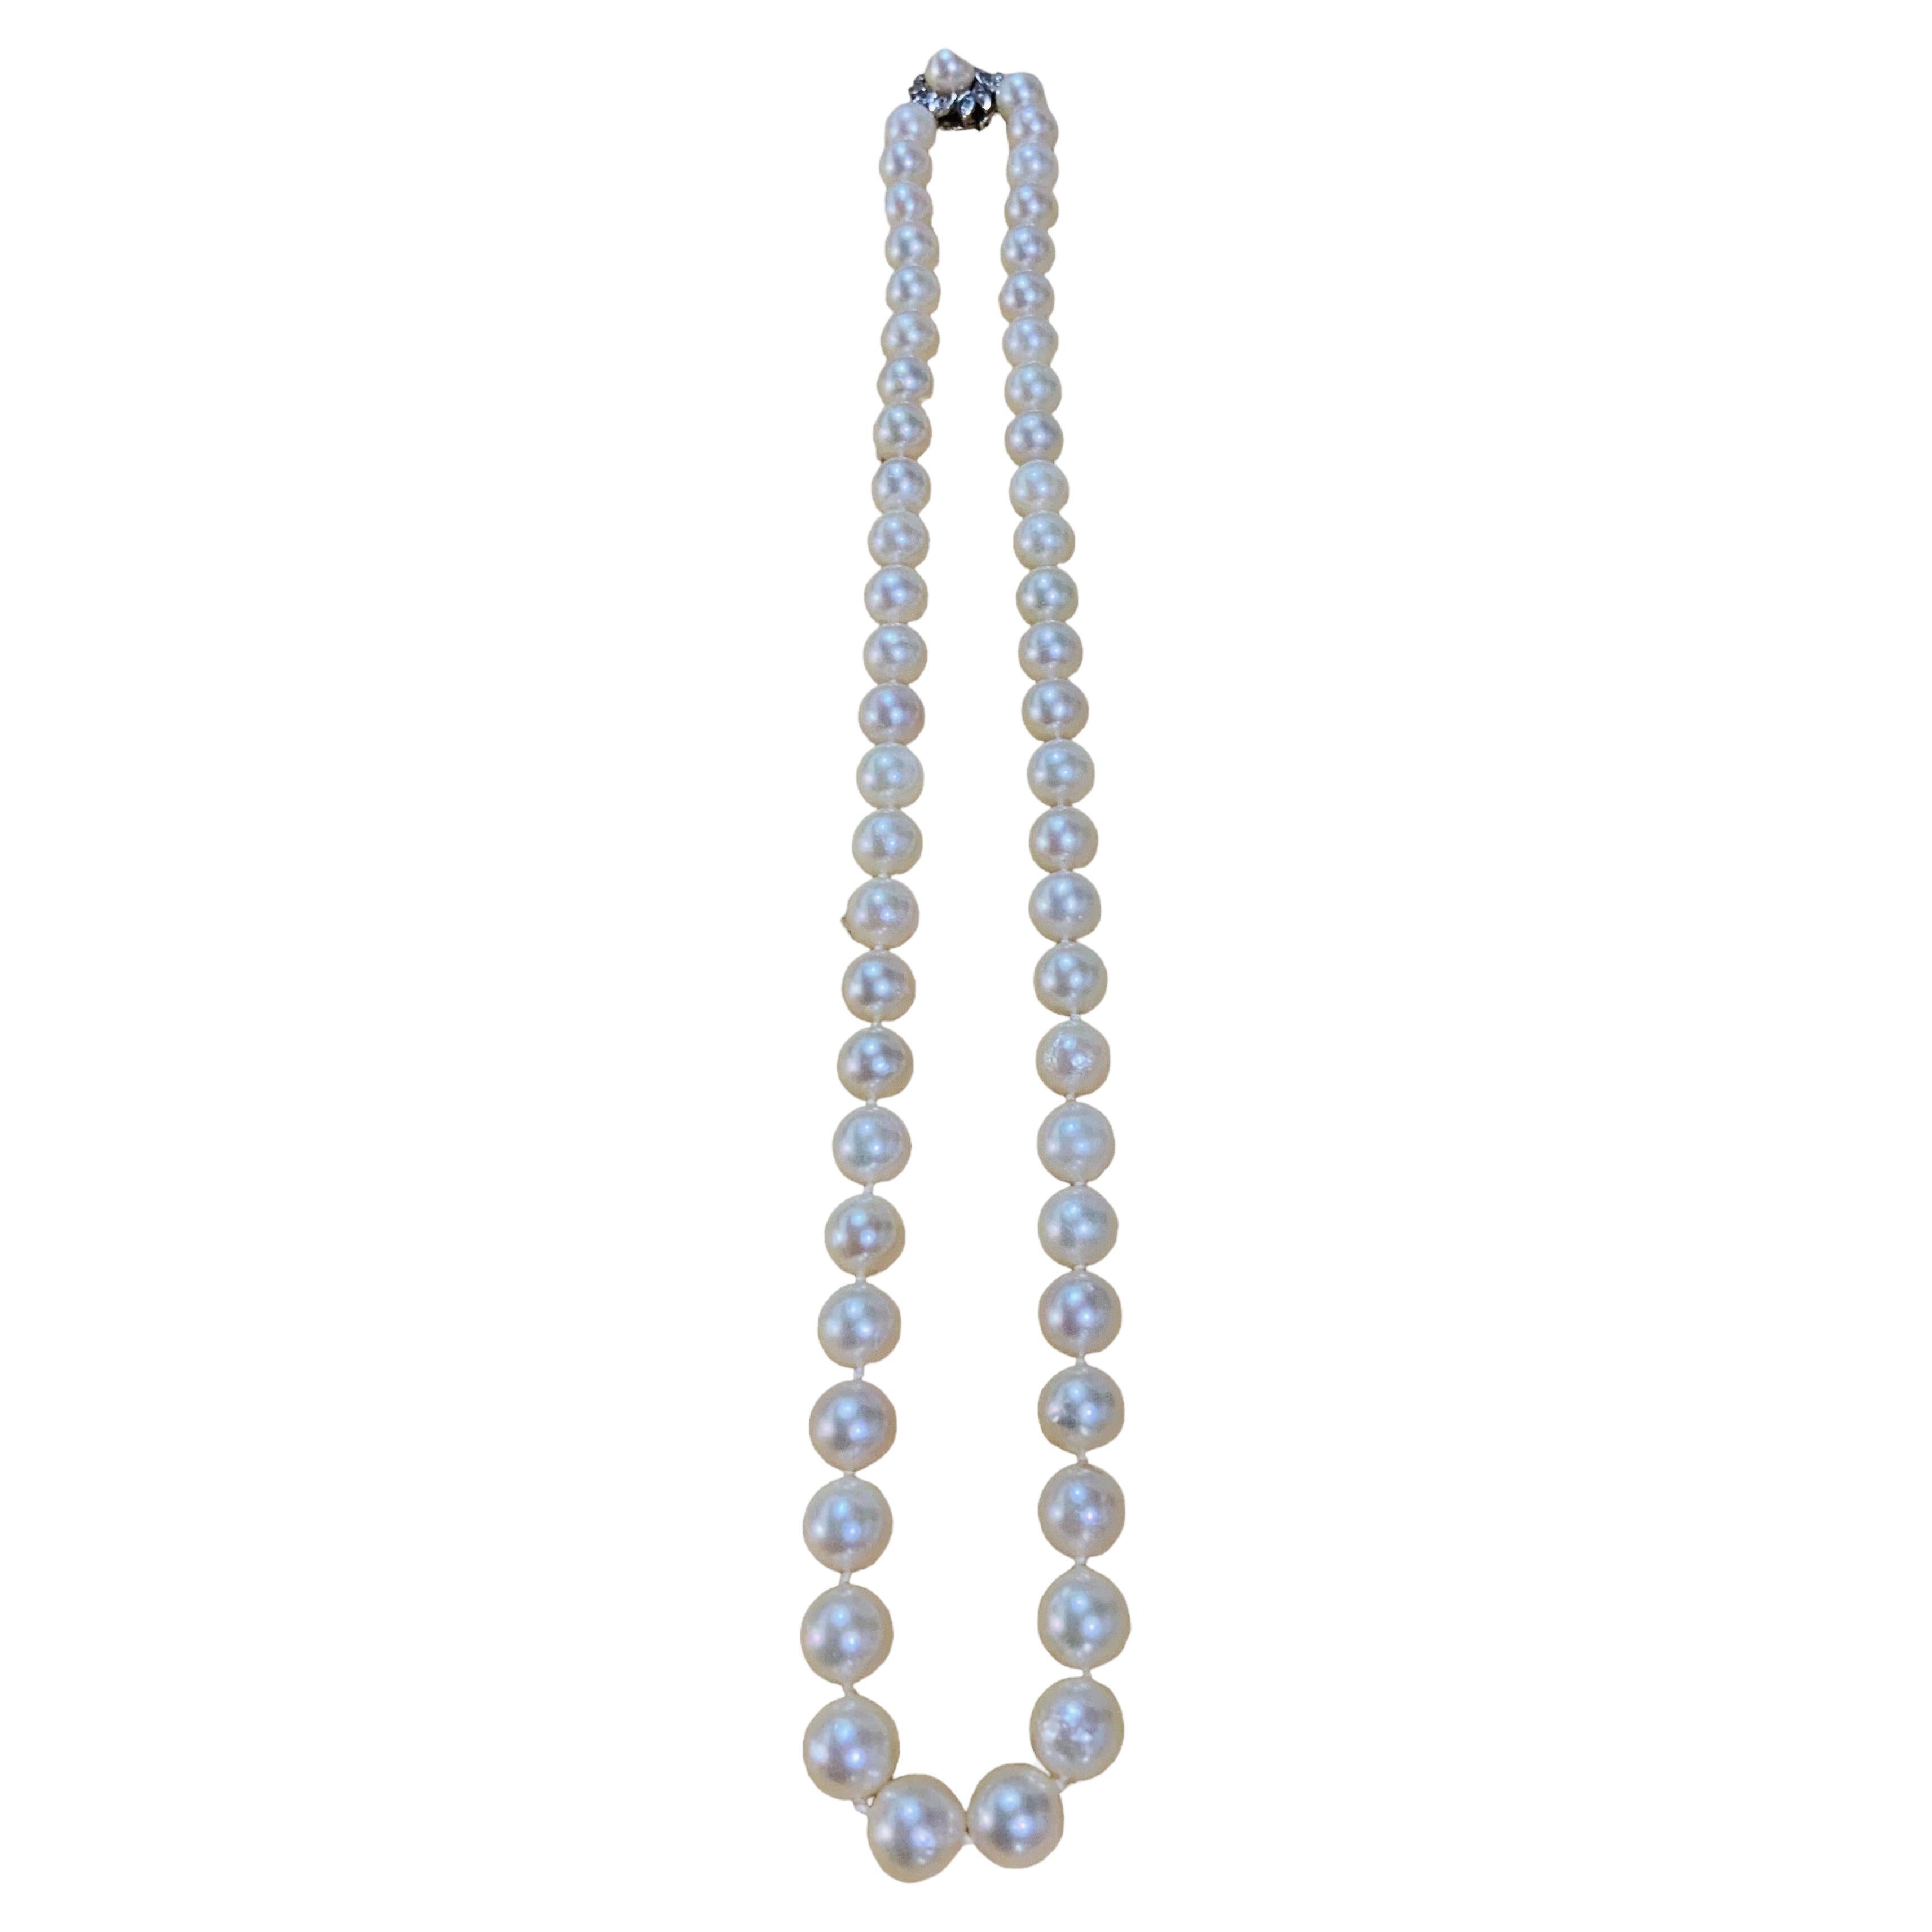 This is a 14K White Gold Akoya Pearls and Diamonds necklace. It depicts a necklace made of round pearls spheres fasten on a silk string with double knots. Its 14k white gold hidden box safety closure is shaped as a flower adorned with a single pearl